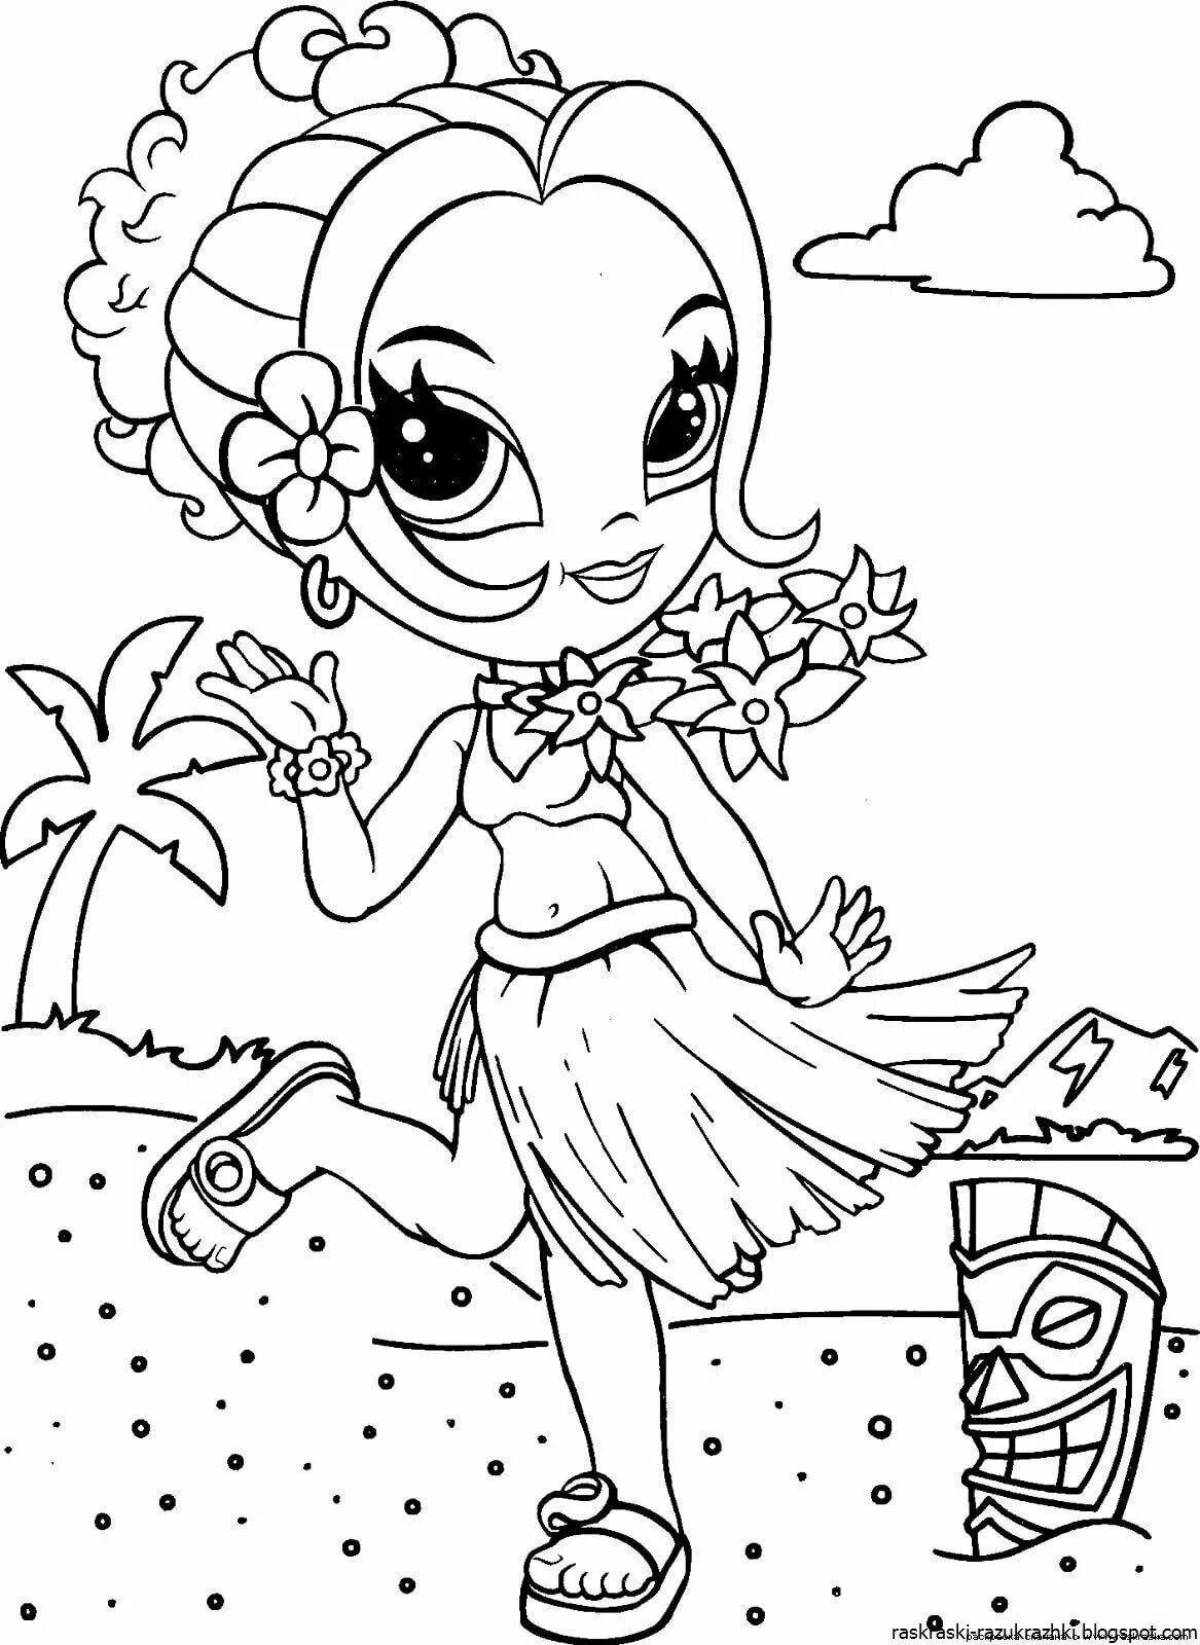 Dreamy coloring for girls pdf